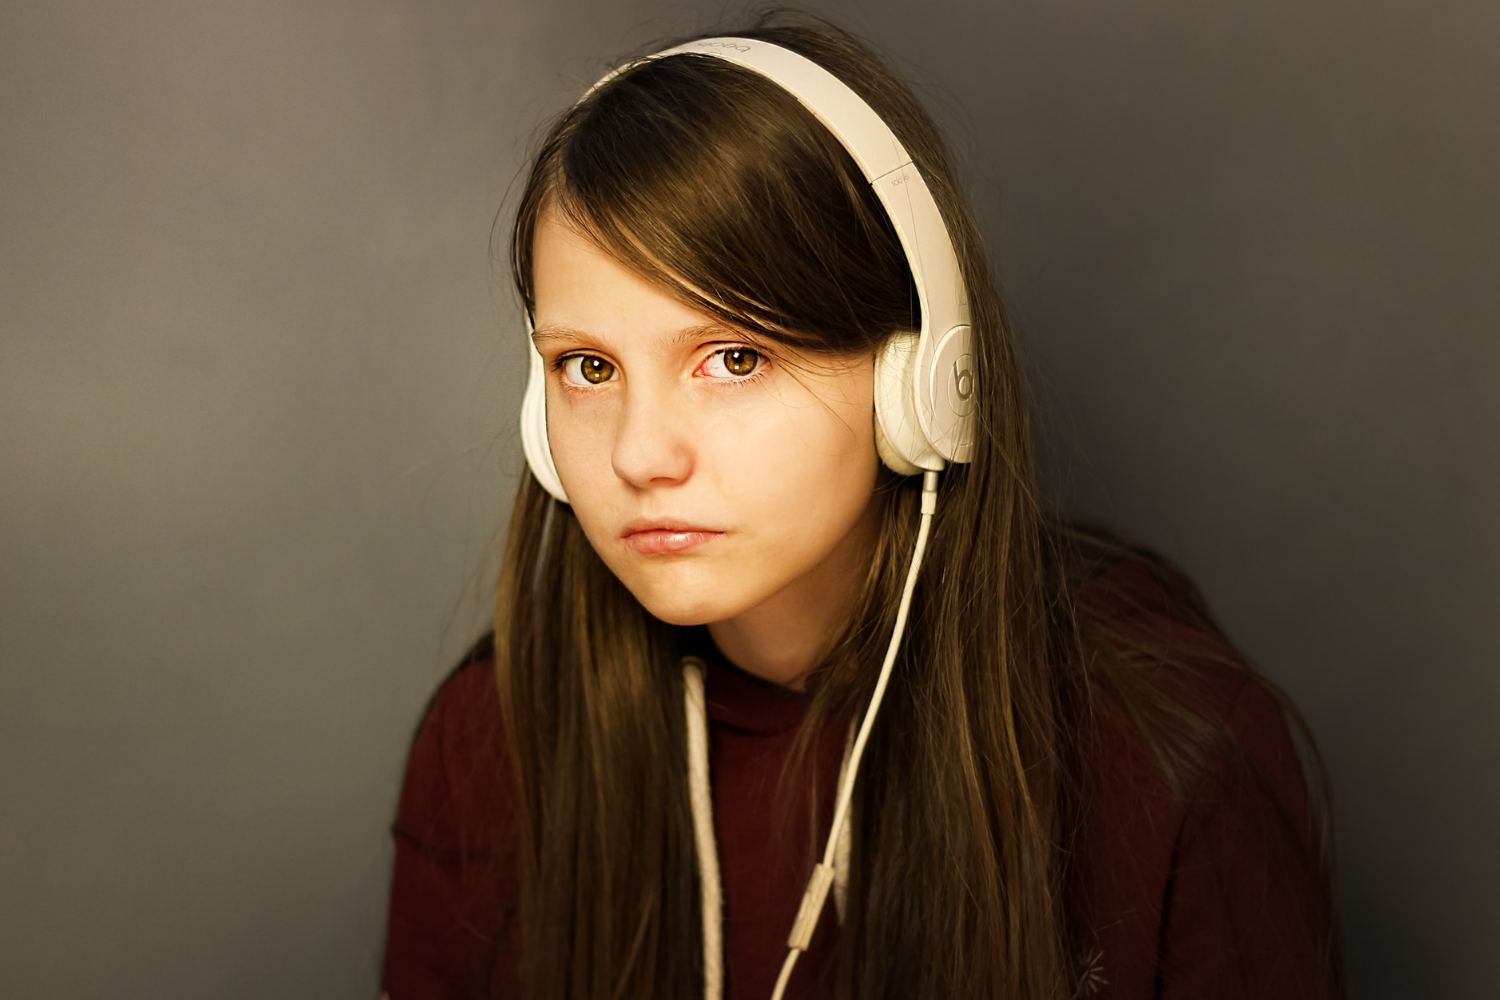 A young teenage girl with a sullen expression, listening to music